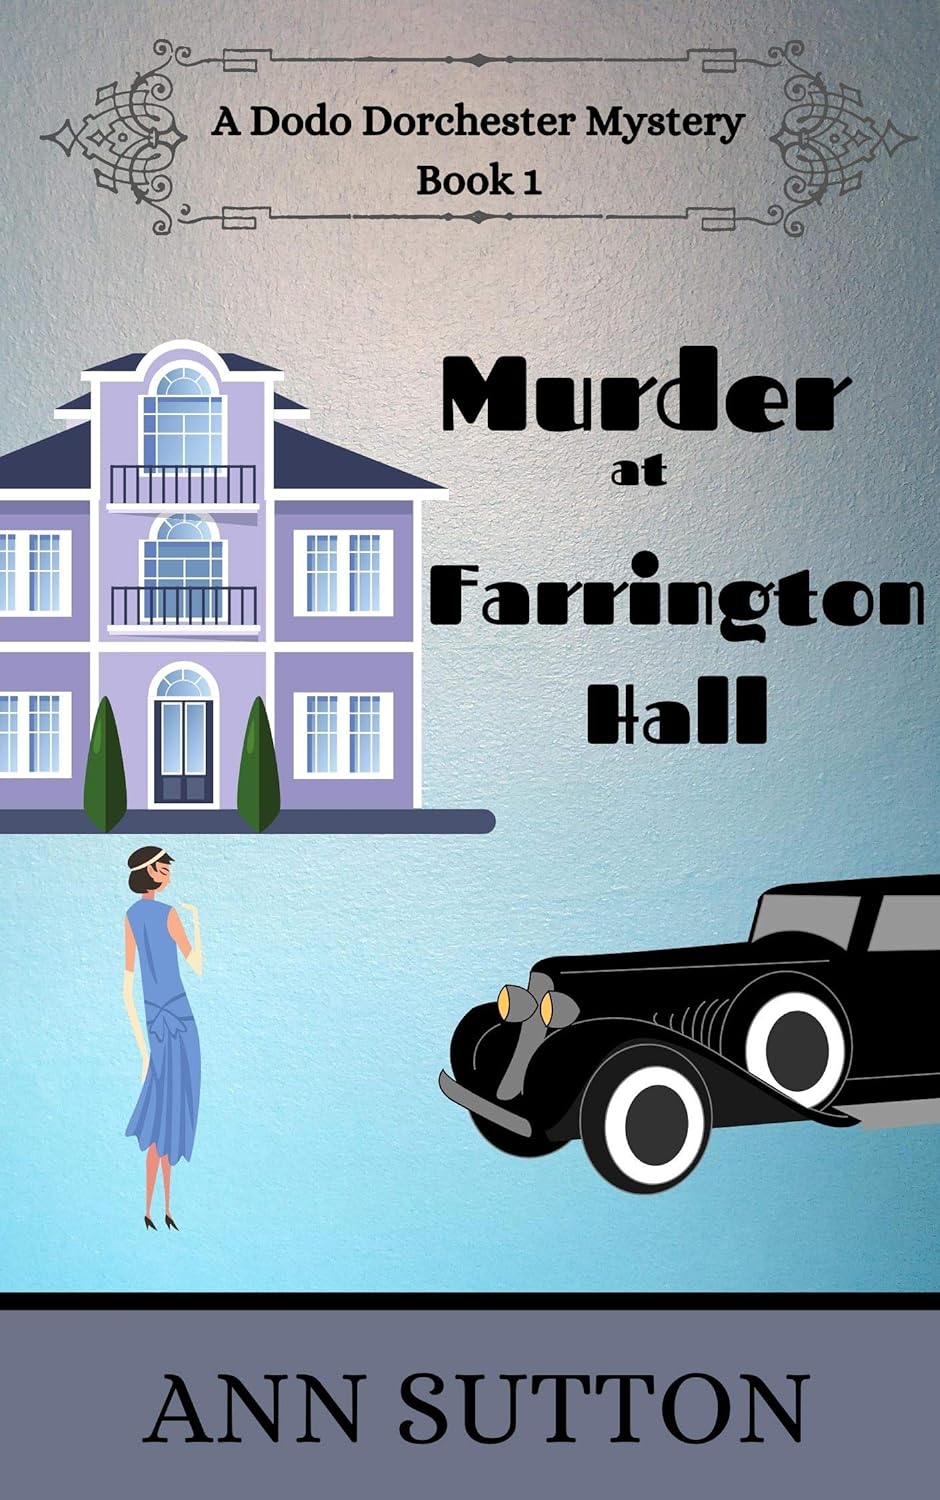 Murder at Farrington Hall Dodo Dorchester Mystery by Bestselling Author Ann Sutton